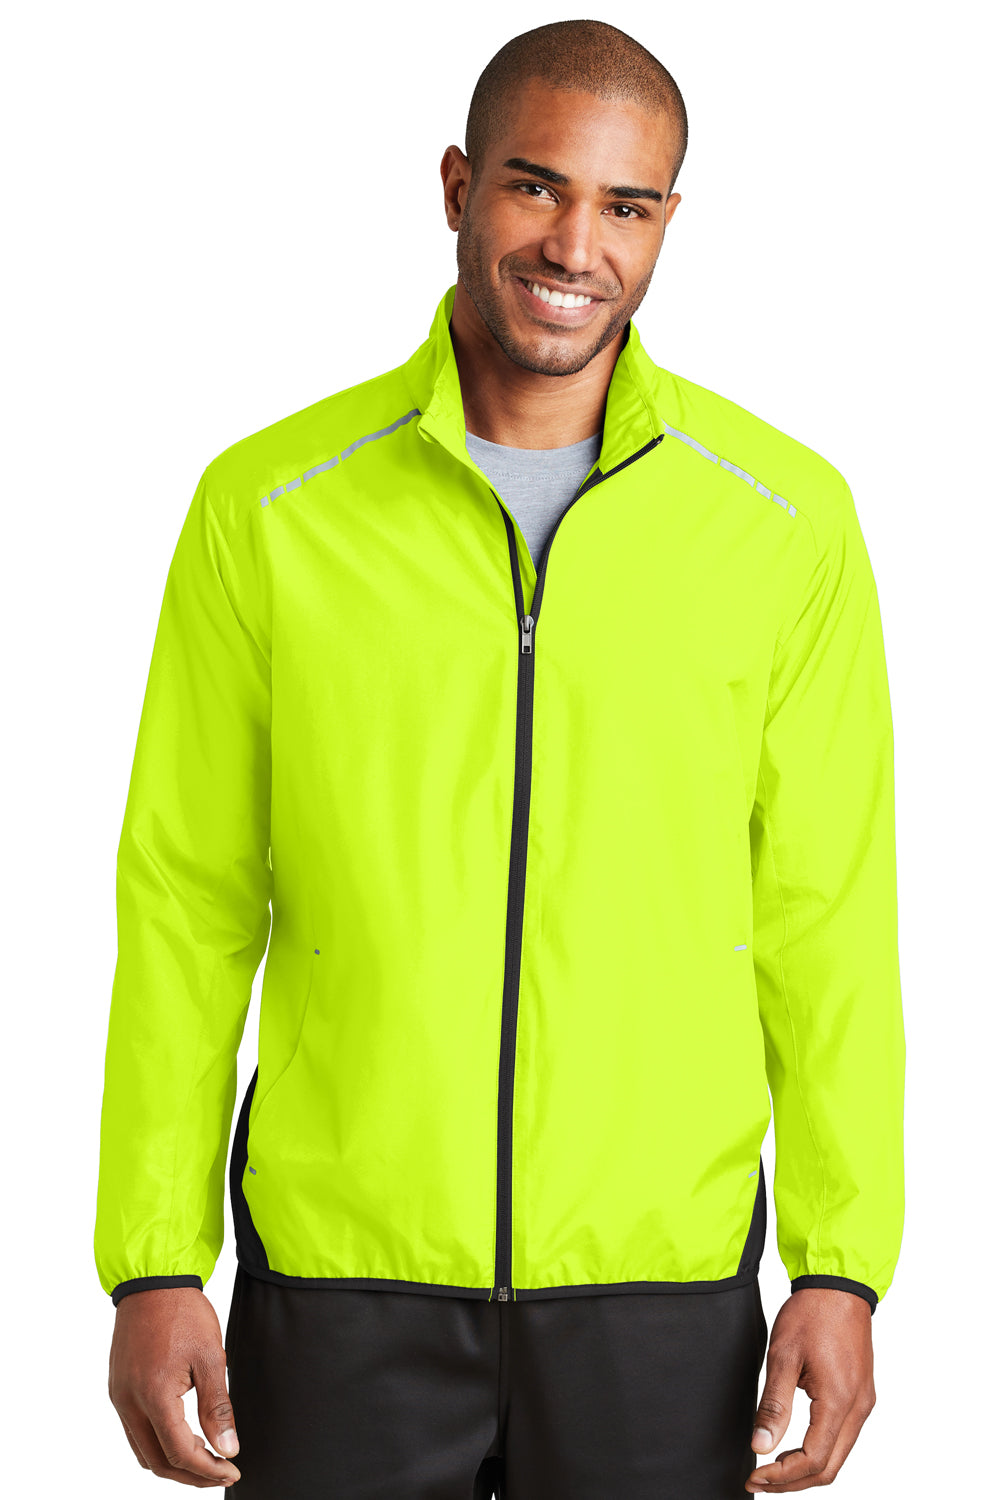 Port Authority J345 Mens Zephyr Reflective Hit Wind & Water Resistant Full Zip Jacket Safety Yellow Front